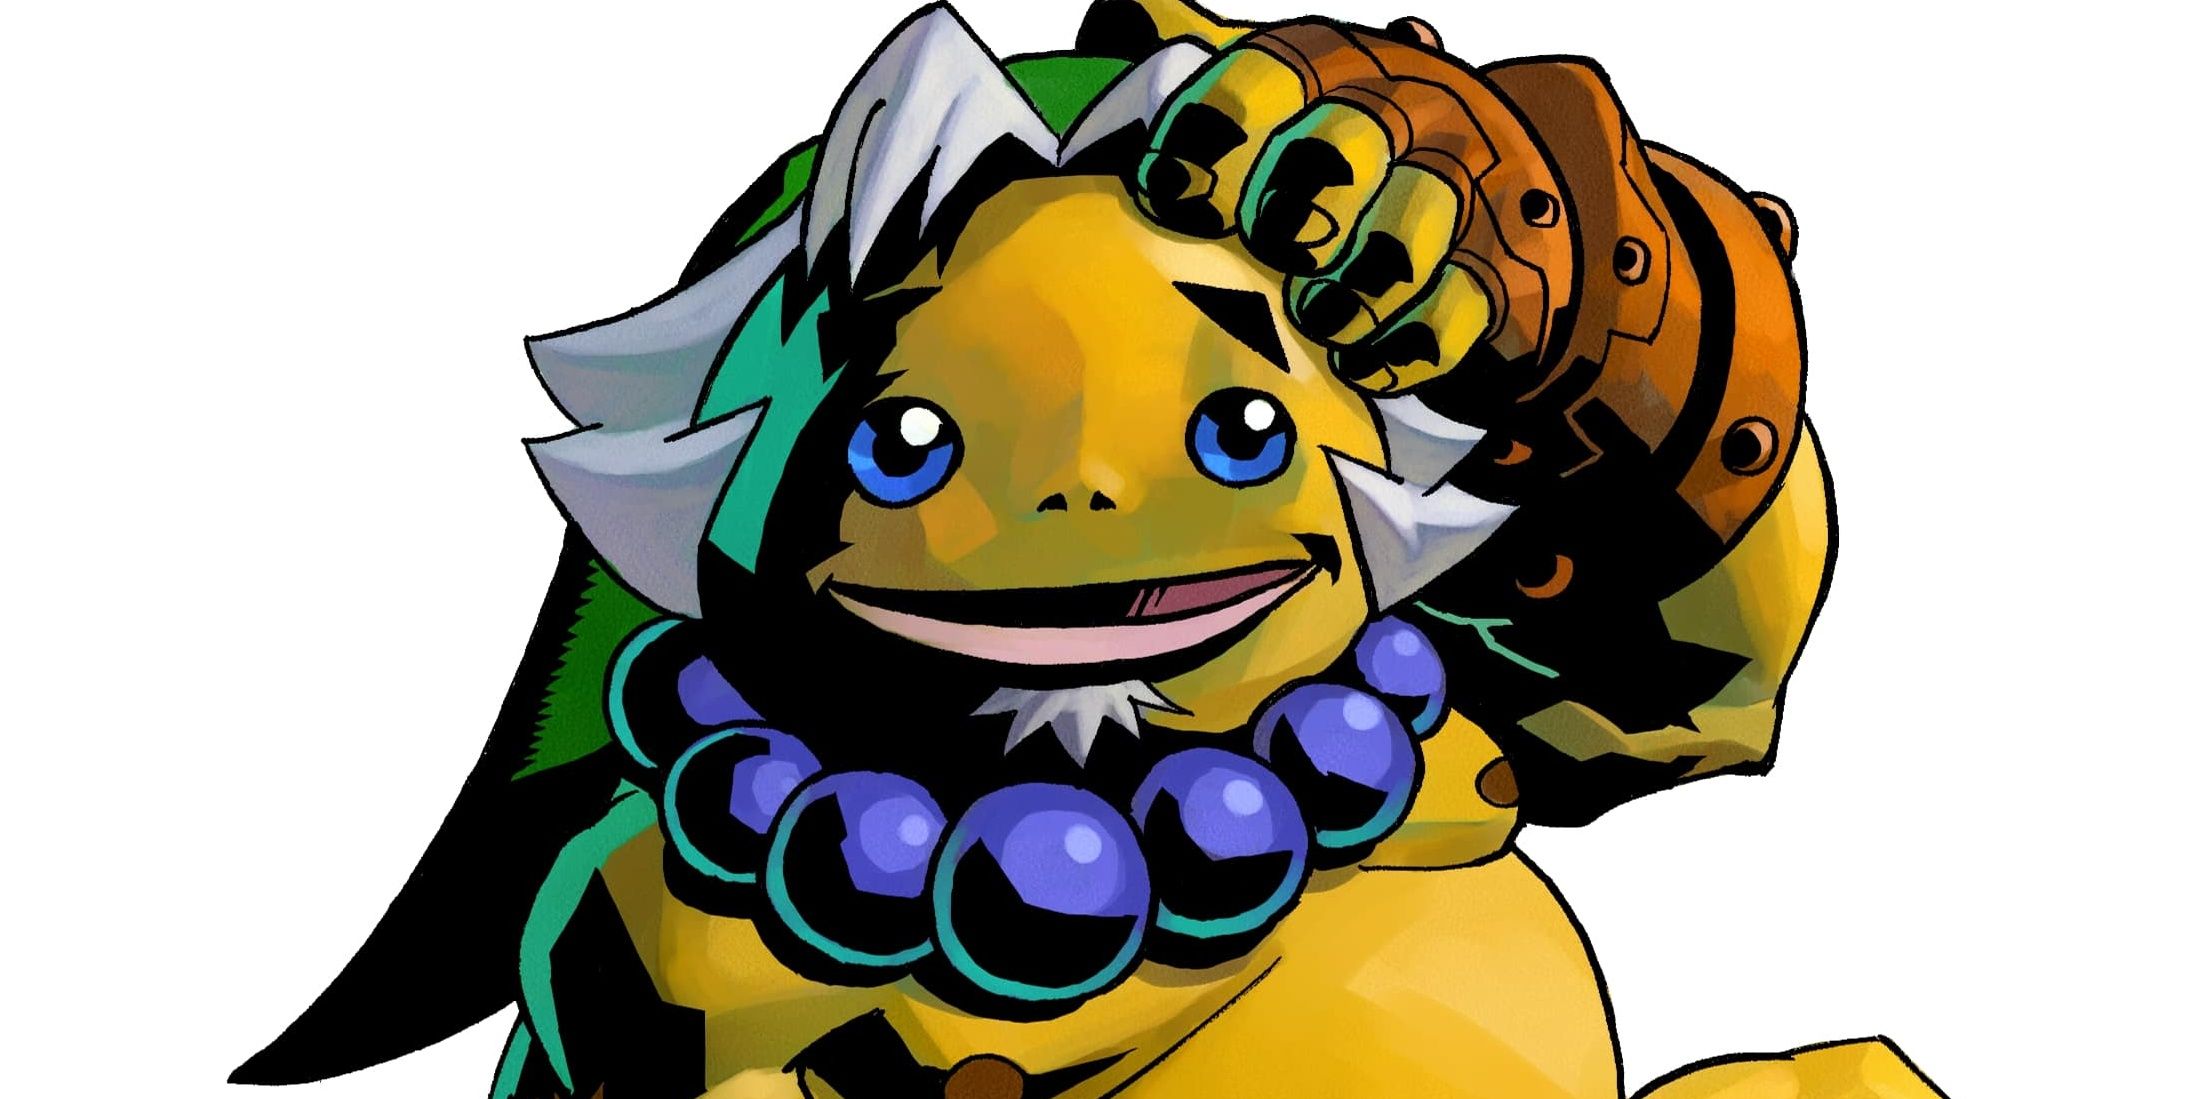 An official art of Link transformed into a Goron